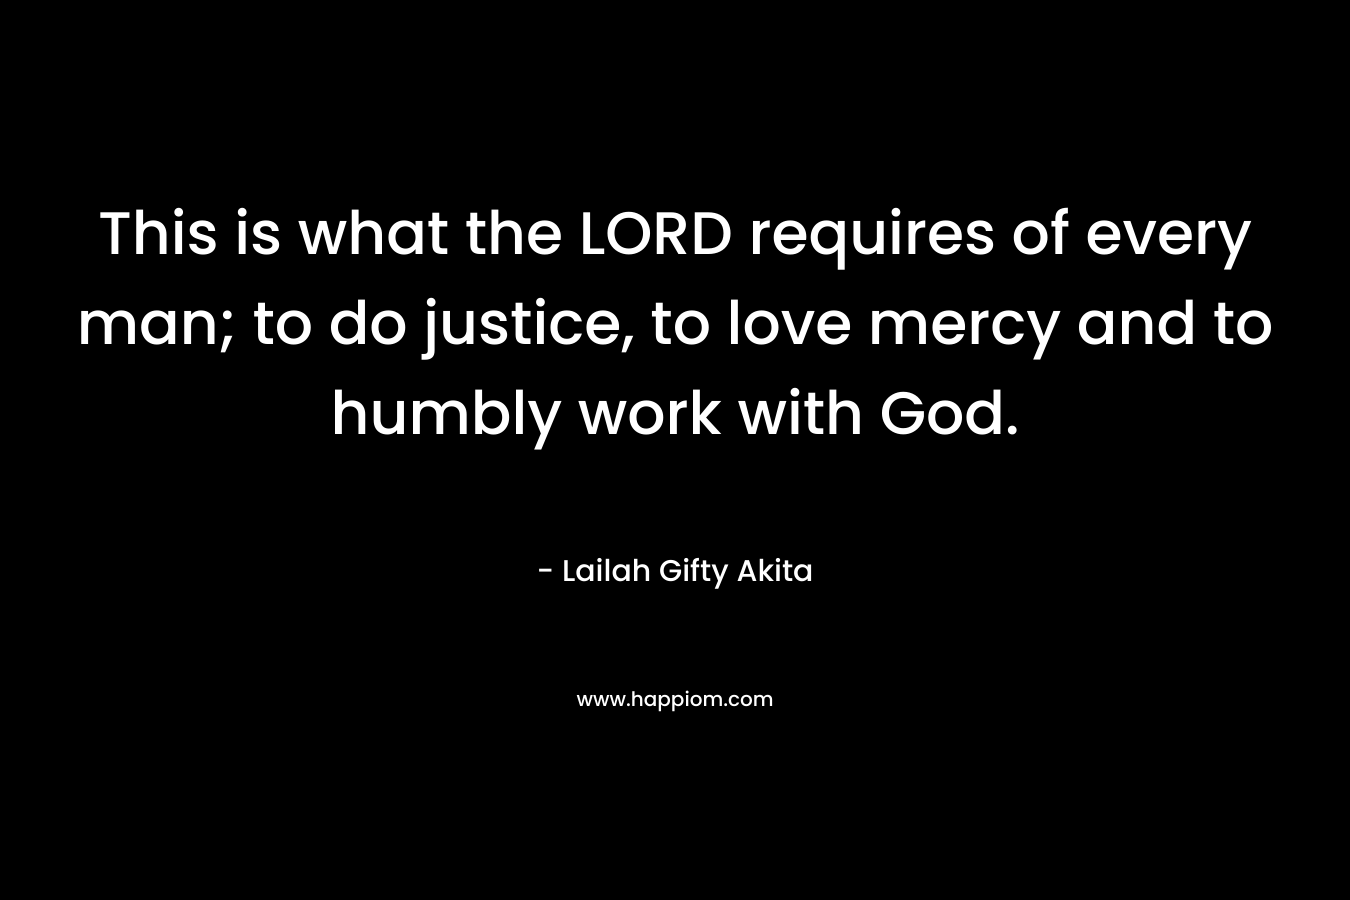 This is what the LORD requires of every man; to do justice, to love mercy and to humbly work with God.